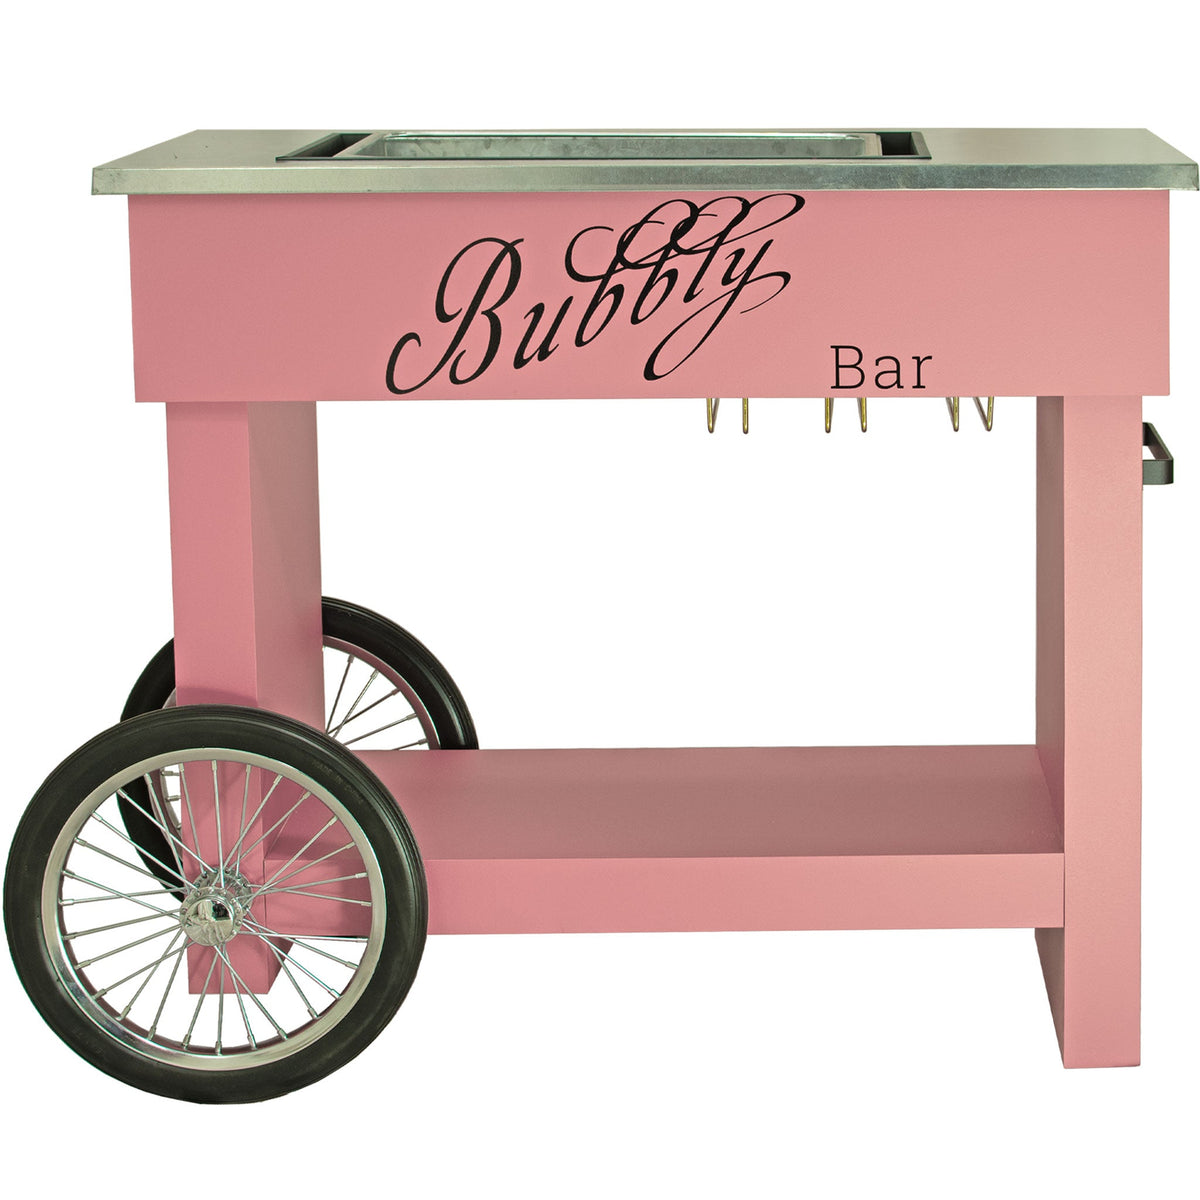 Lee Display's Champagne and Wine Bar Cart with Wheels in Pink Color and a Bubbly Bar  Decal